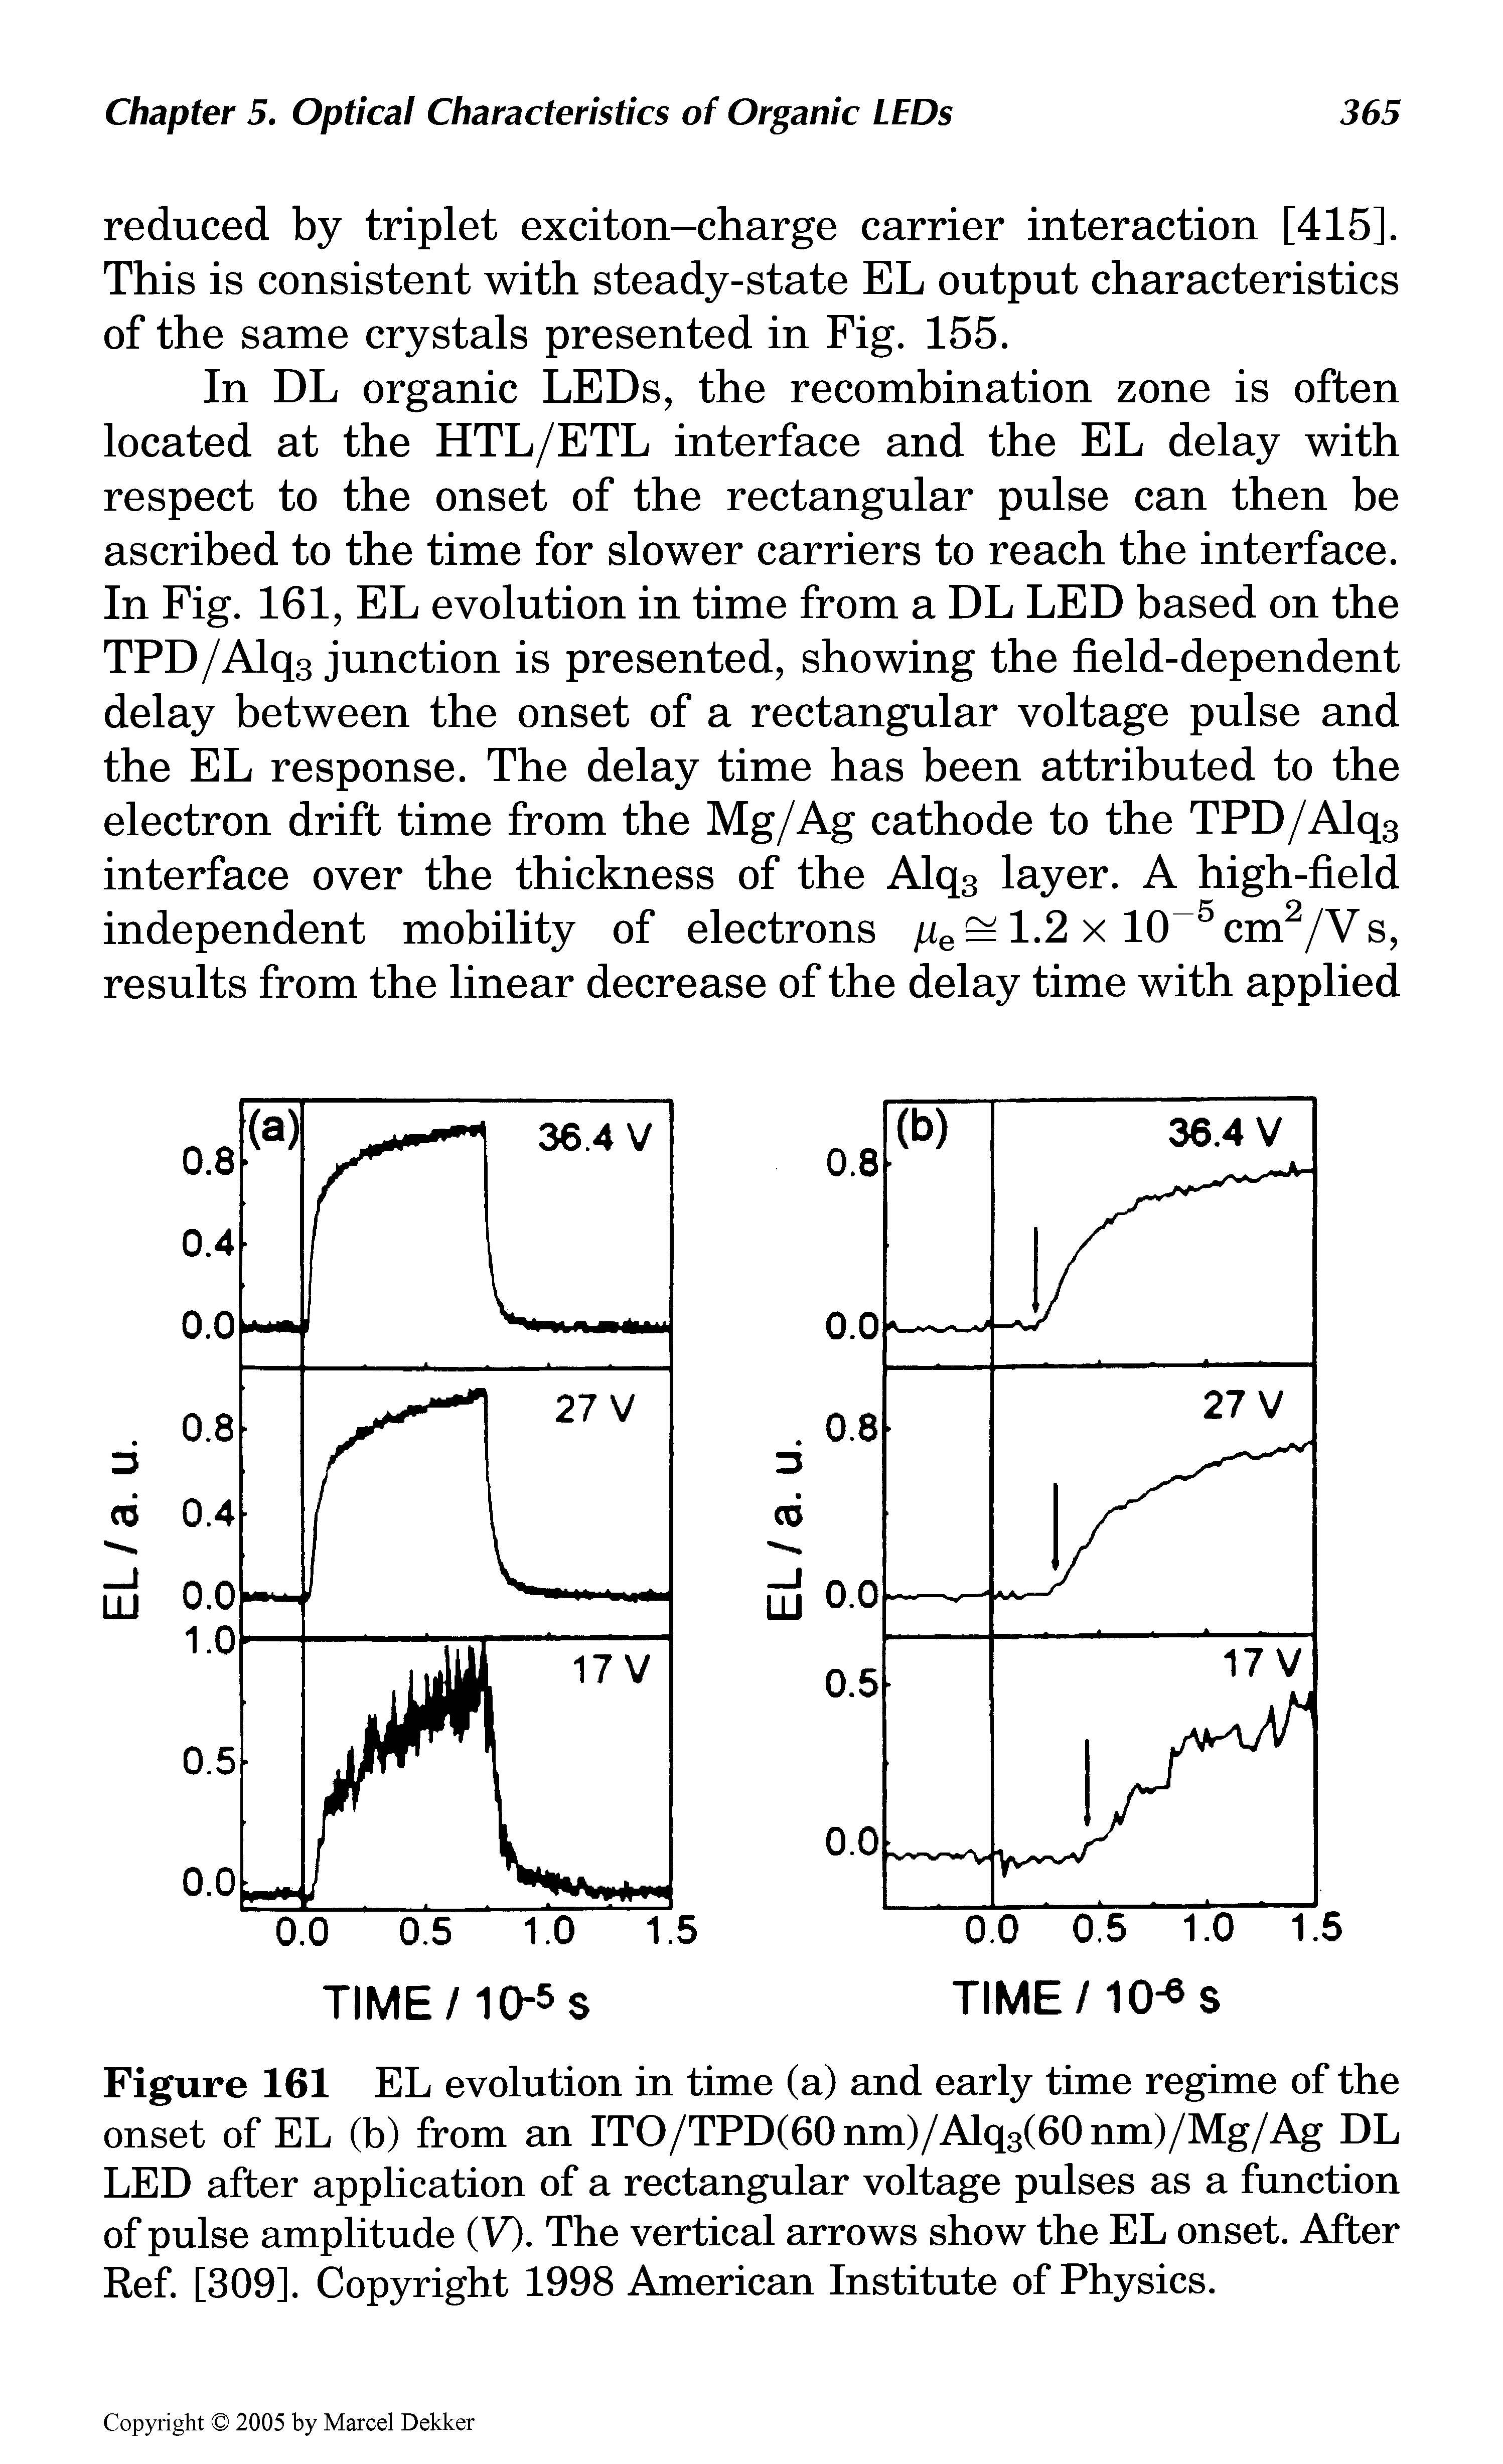 Figure 161 EL evolution in time (a) and early time regime of the onset of EL (b) from an ITO/TPD(60nm)/ALq3(60mn)/Mg/Ag DL LED after application of a rectangular voltage pulses as a function of pulse amplitude (V). The vertical arrows show the EL onset. After Ref. [309]. Copyright 1998 American Institute of Physics.